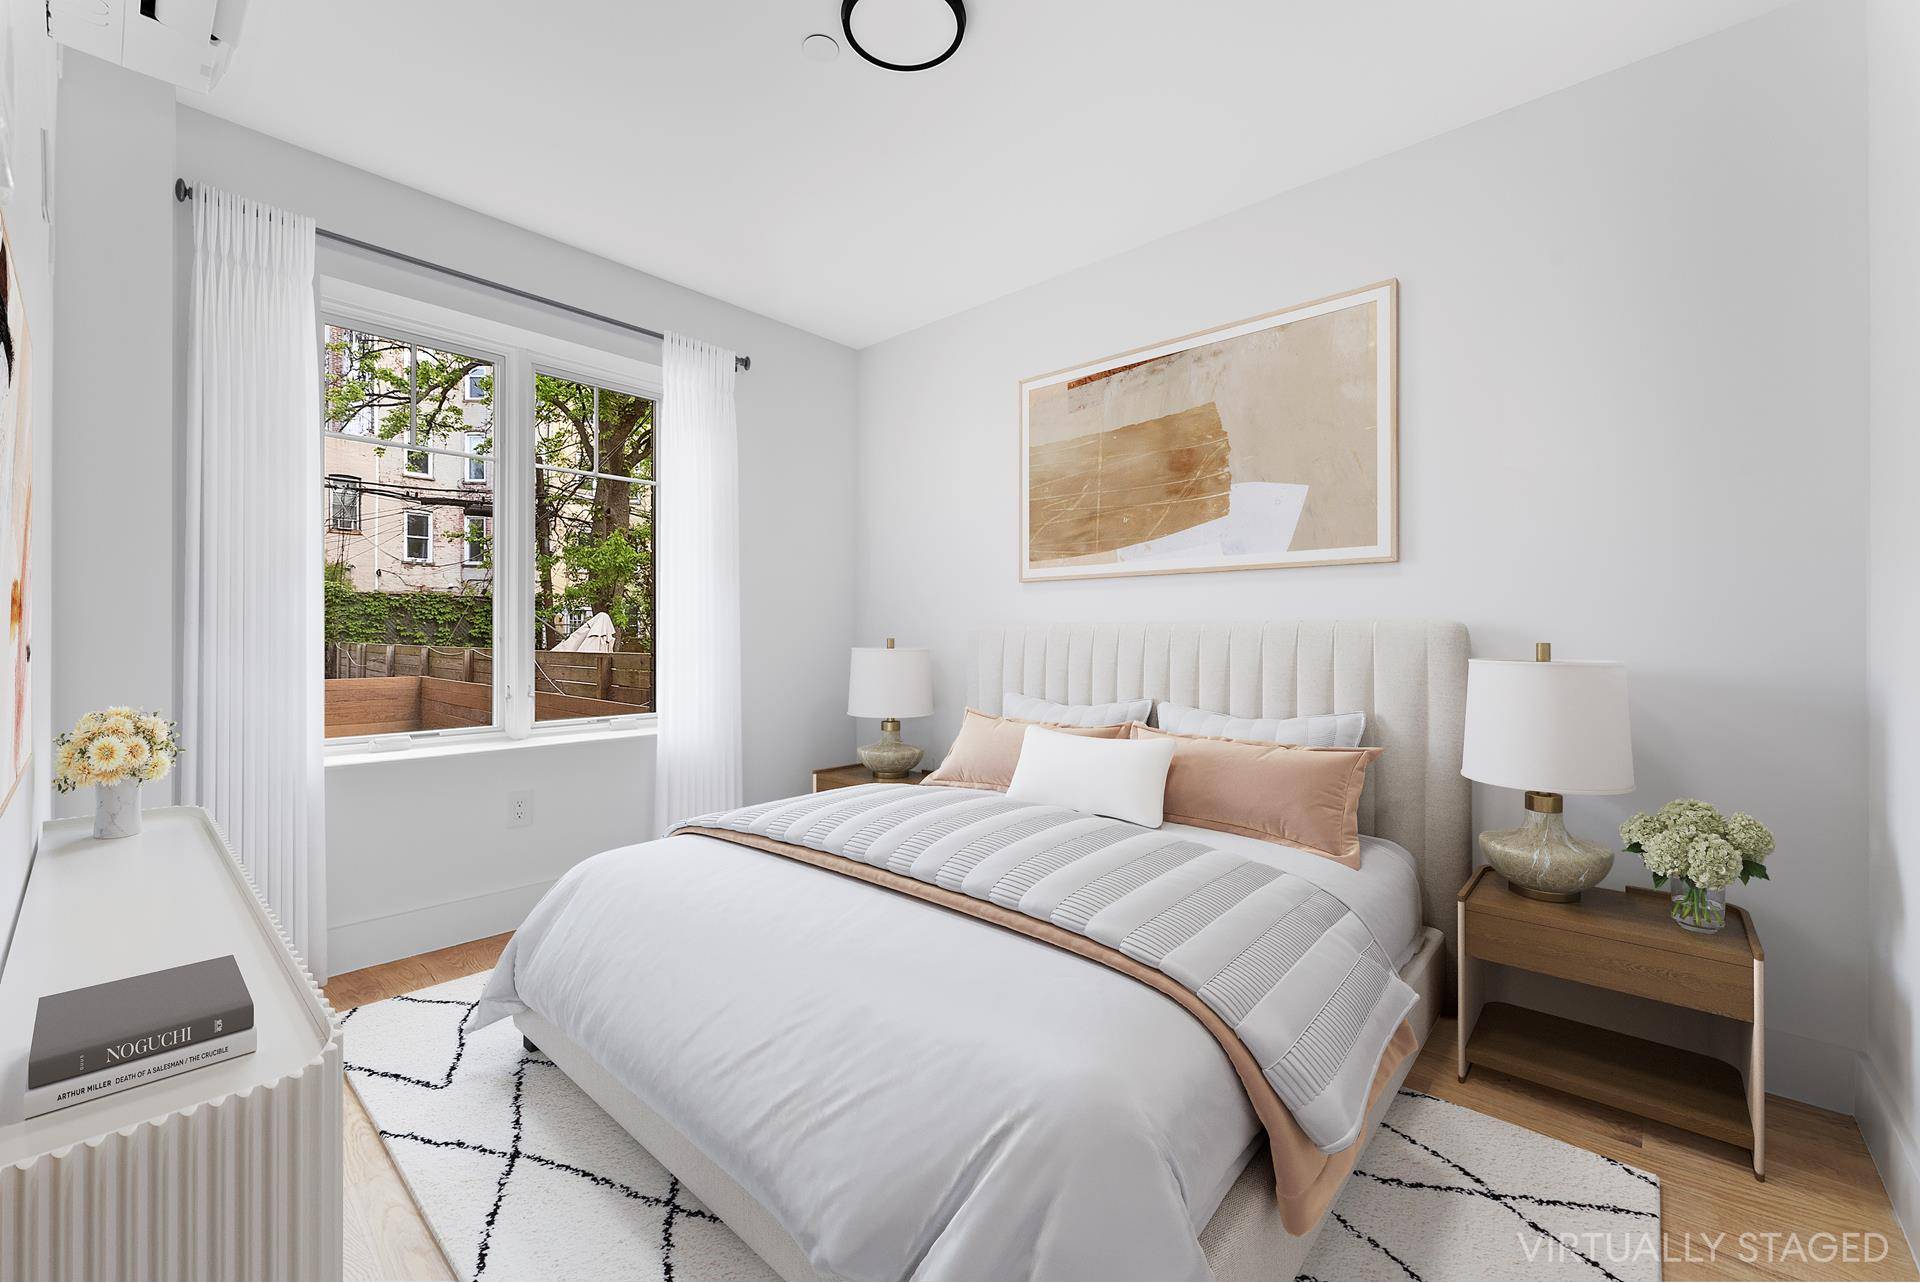 LIVE IN THE PNTHOUSE YOU LOVEWelcome to The Leah at 61 Clarkson, a new icon of Brooklyn modernity positioned less than2 blocks from the Q Train, 4 blocks from the ...